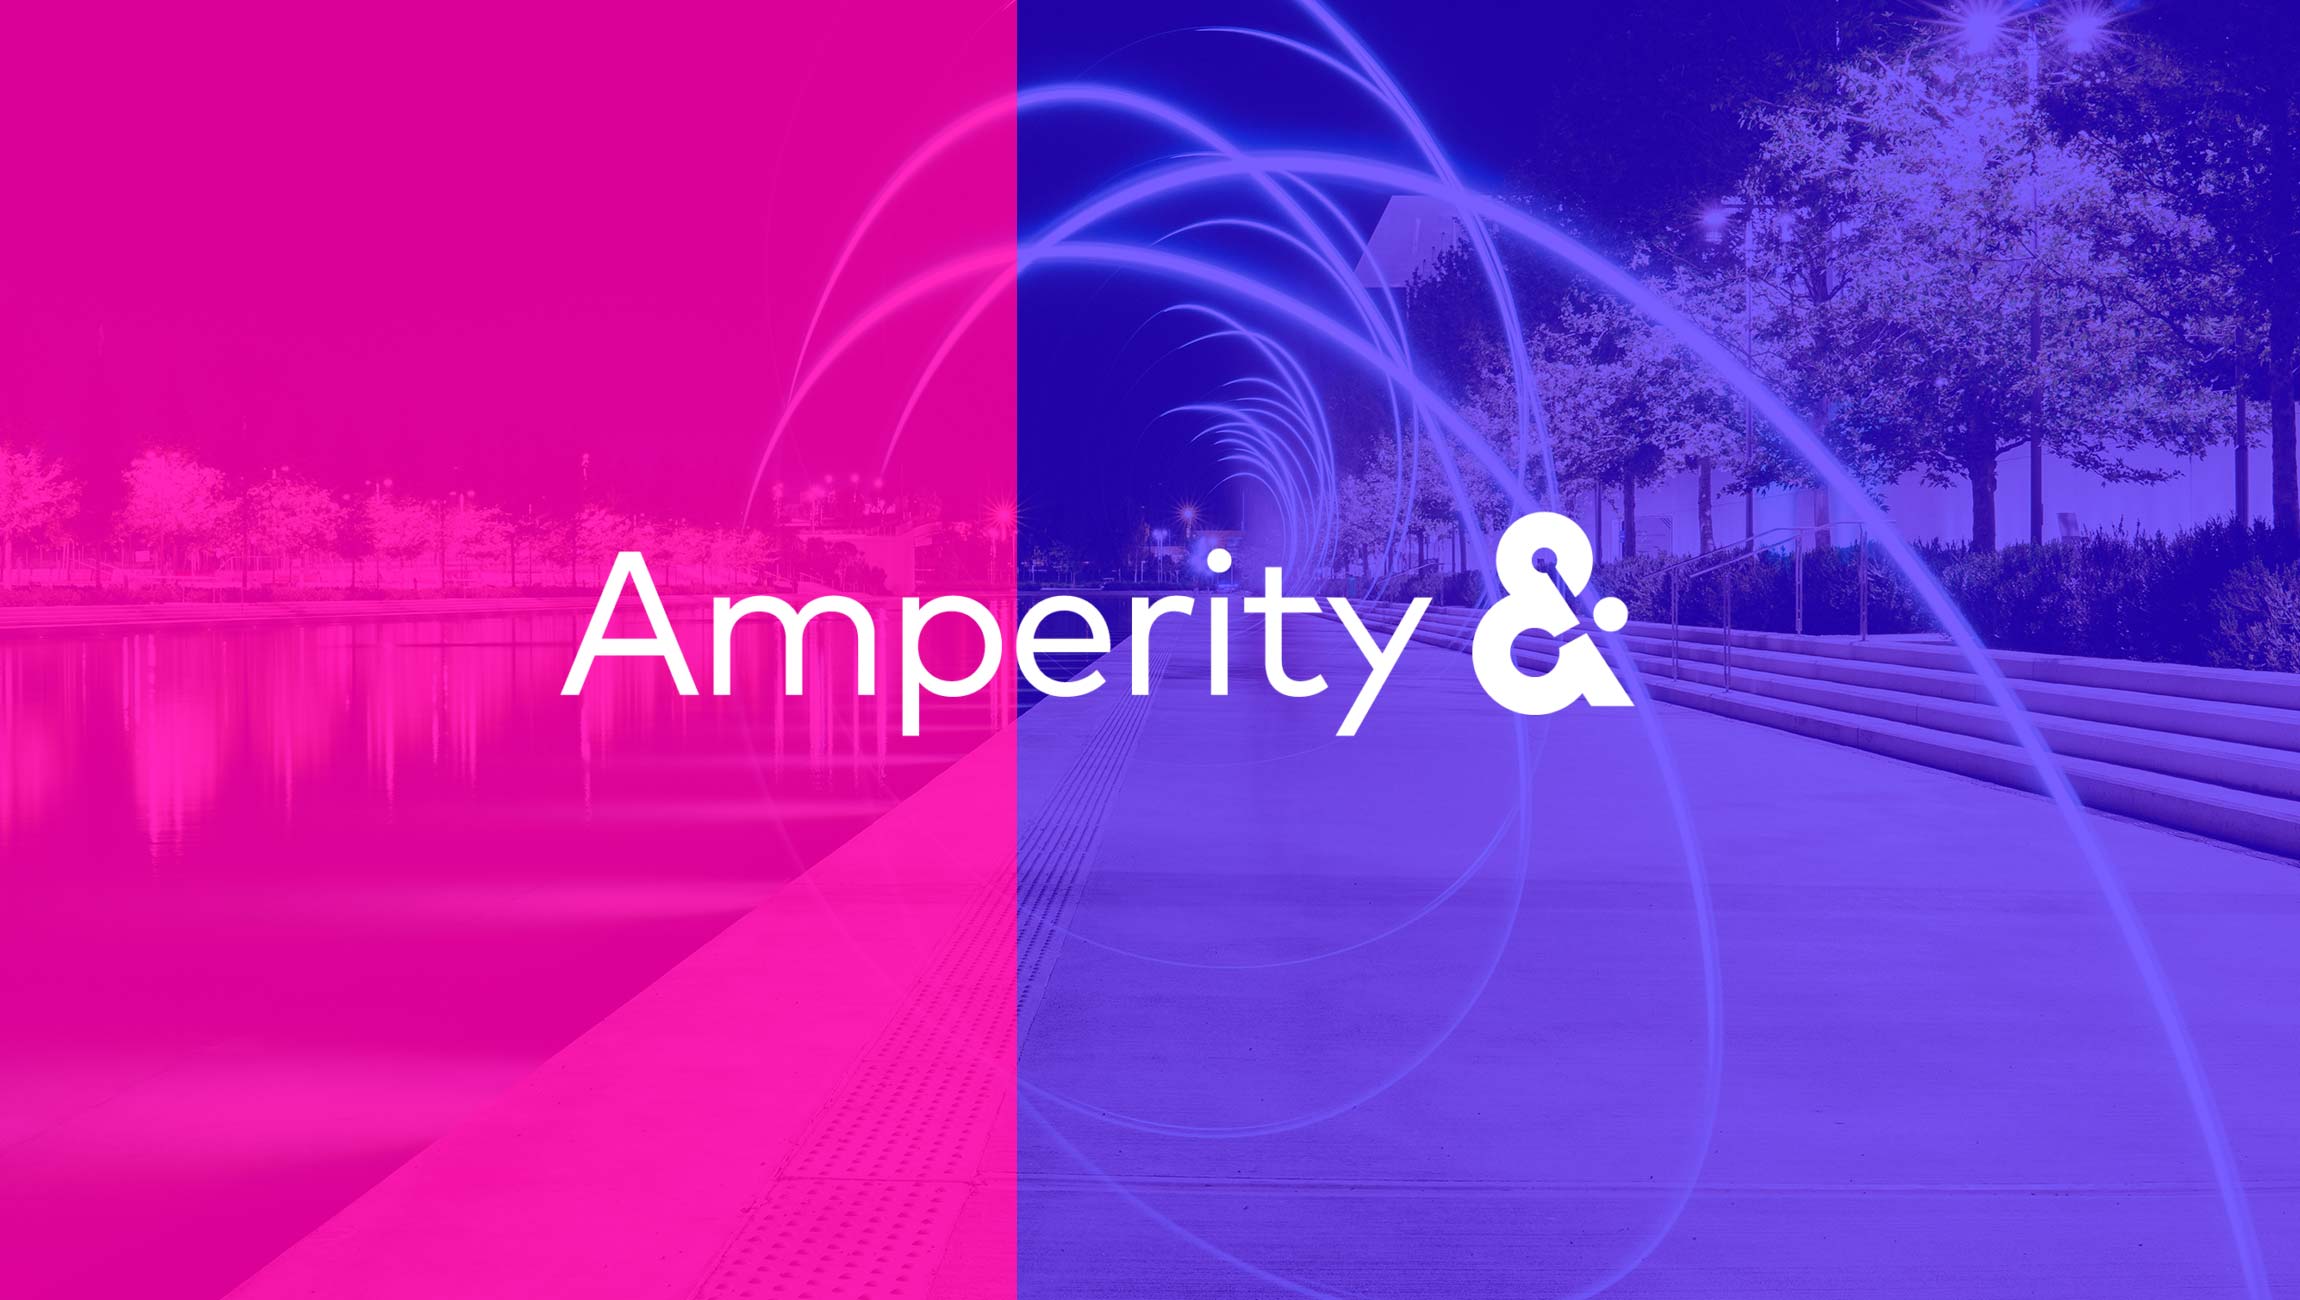 Amperity Welcomes Rian Smith & Sam Bessey To Boost Its Customer Data Platform In The APAC Region